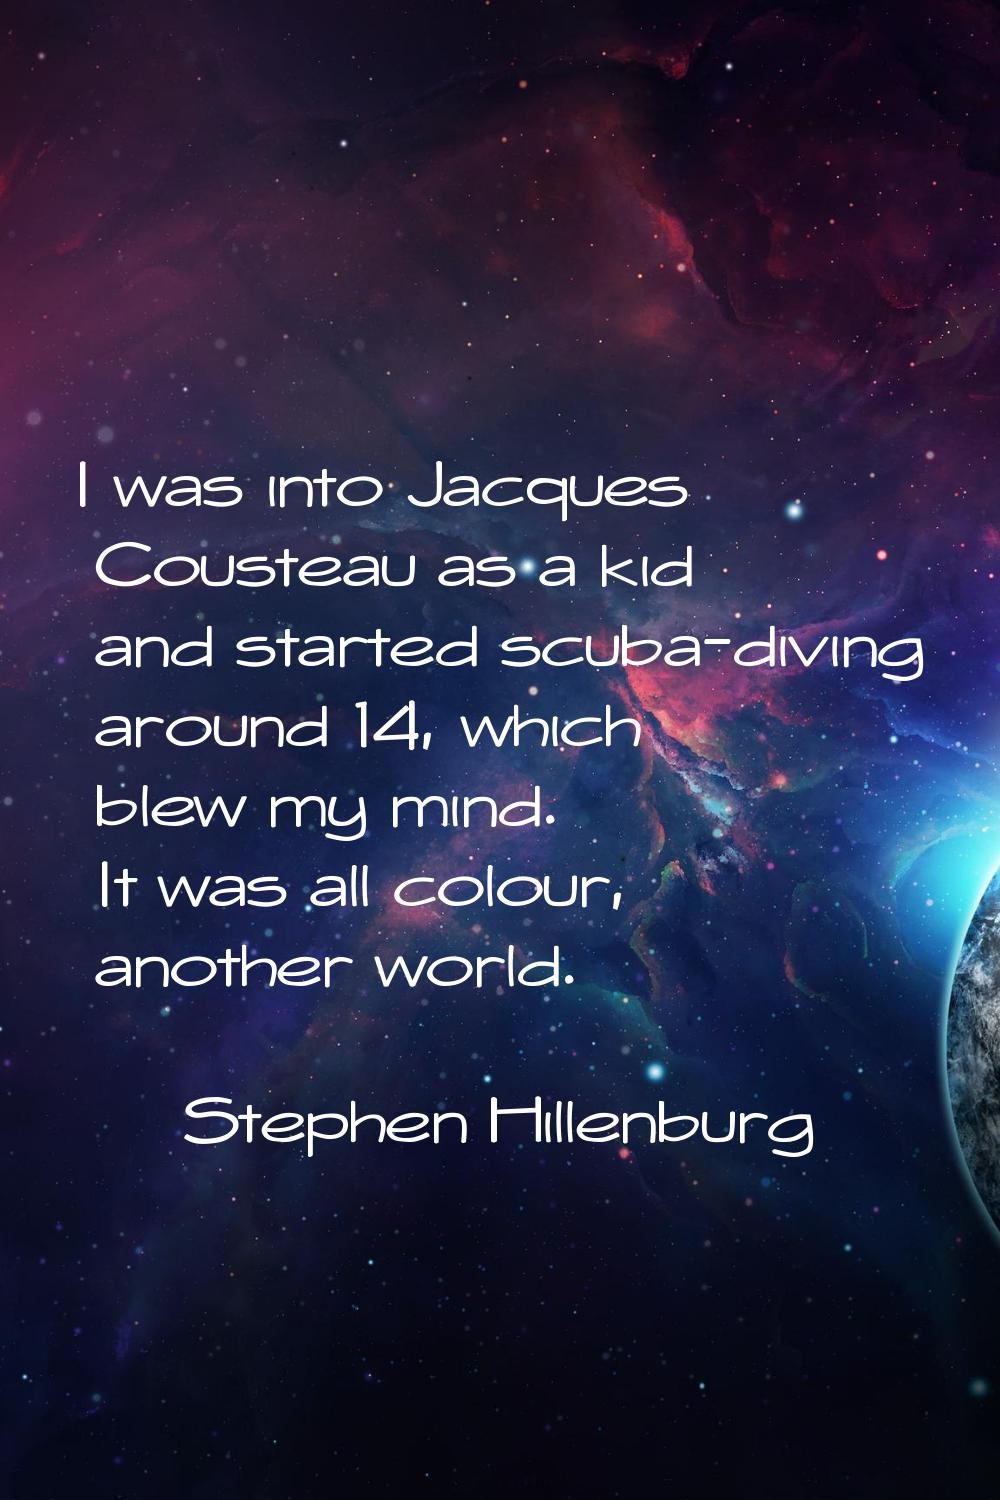 I was into Jacques Cousteau as a kid and started scuba-diving around 14, which blew my mind. It was